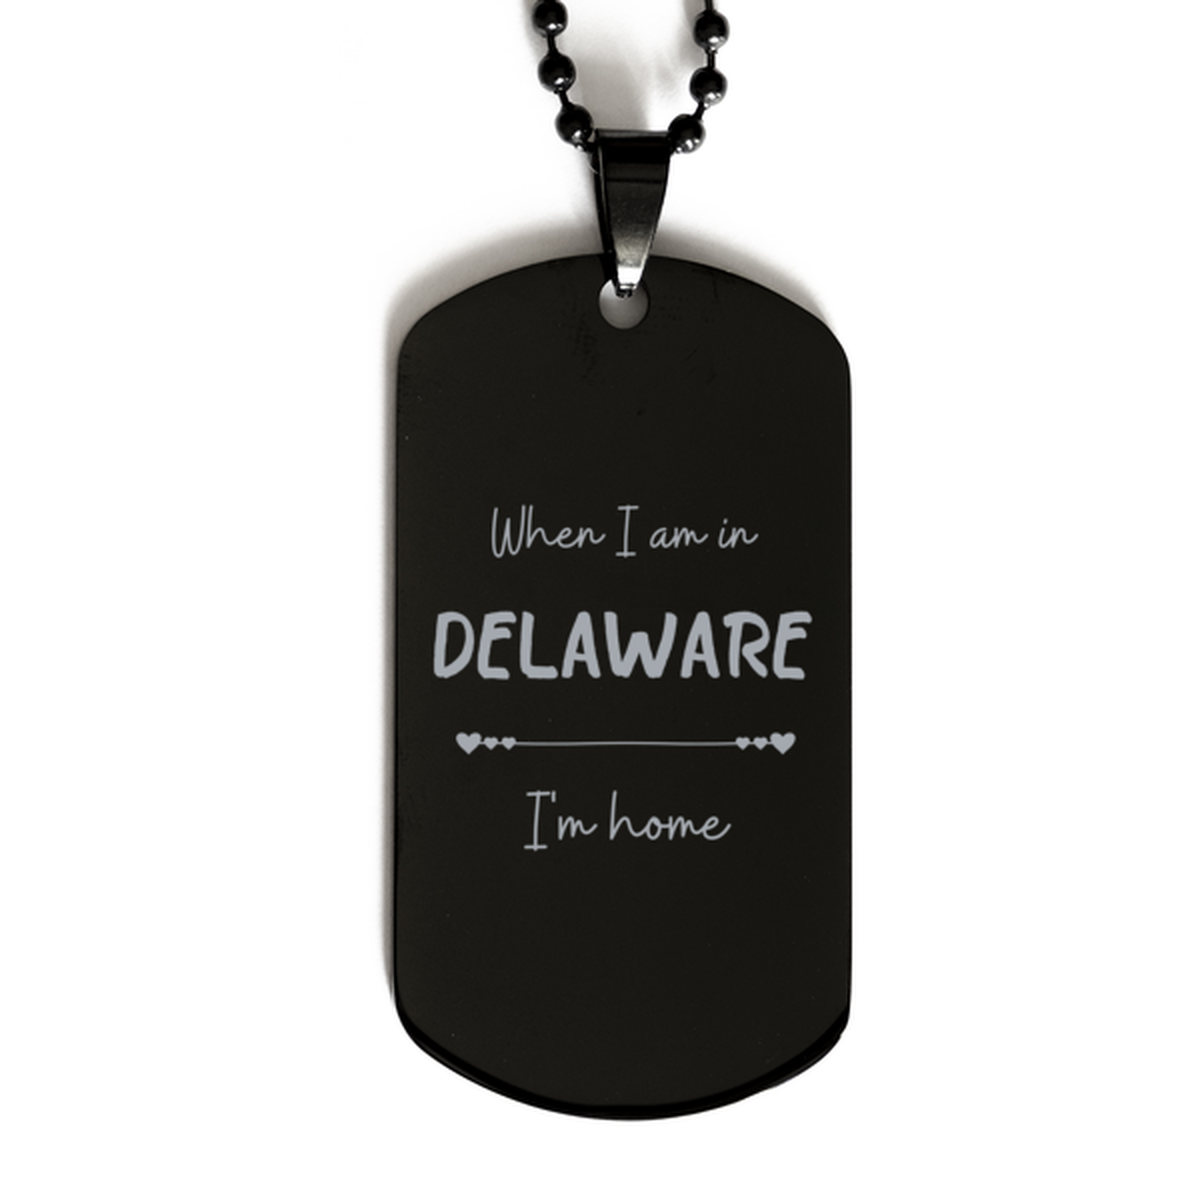 When I am in Delaware I'm home Black Dog Tag, Cheap Gifts For Delaware, State Delaware Birthday Gifts for Friends Coworker